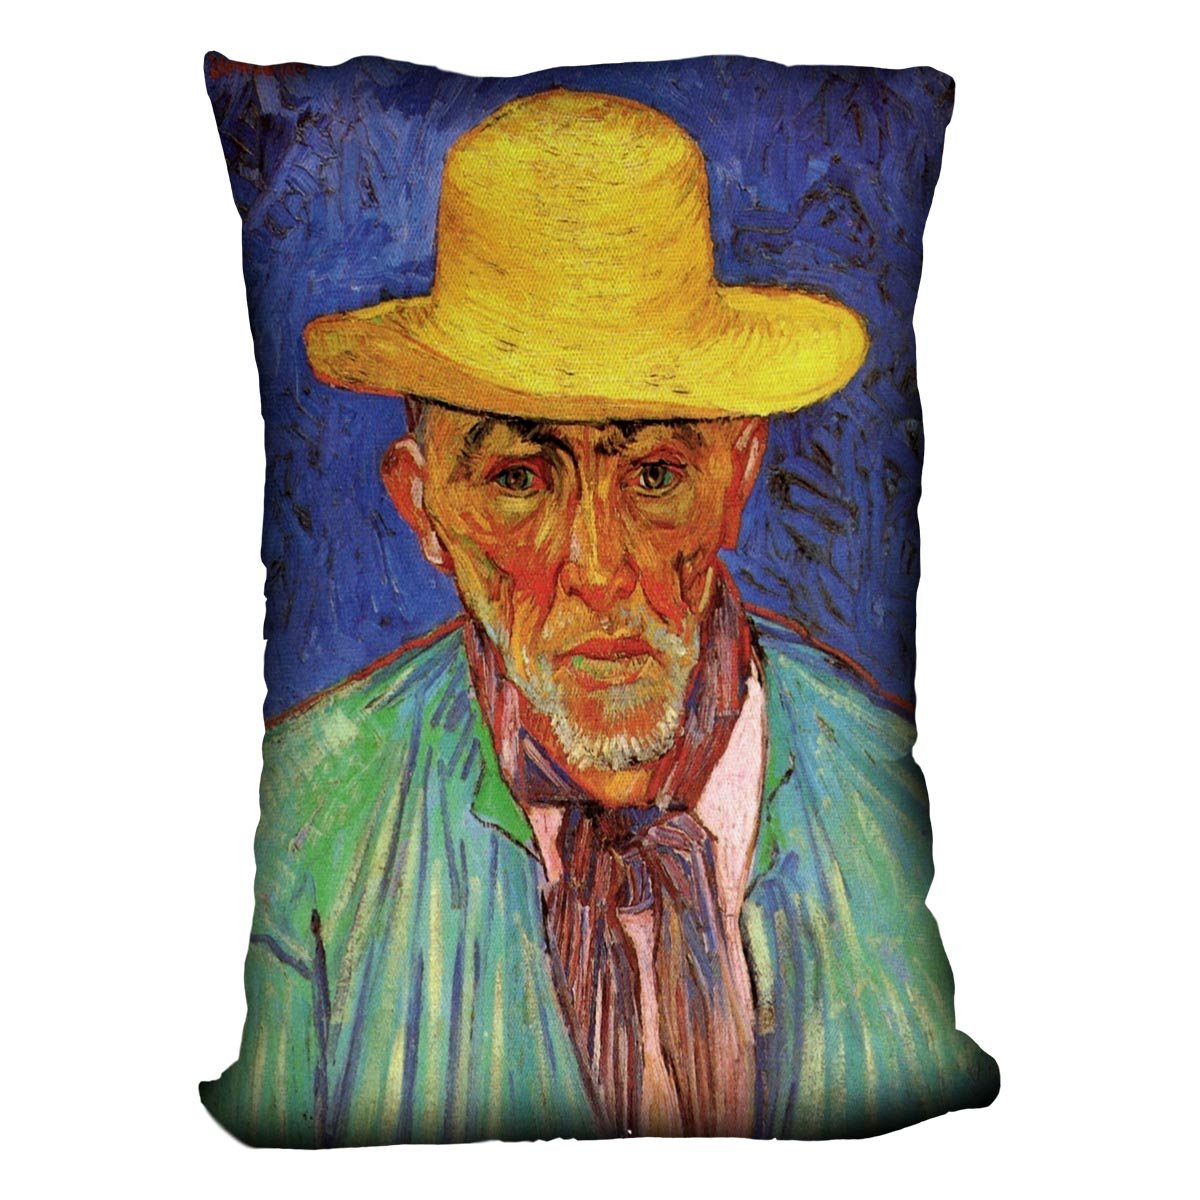 Portrait of Patience Escalier Shepherd in Provence by Van Gogh Throw Pillow